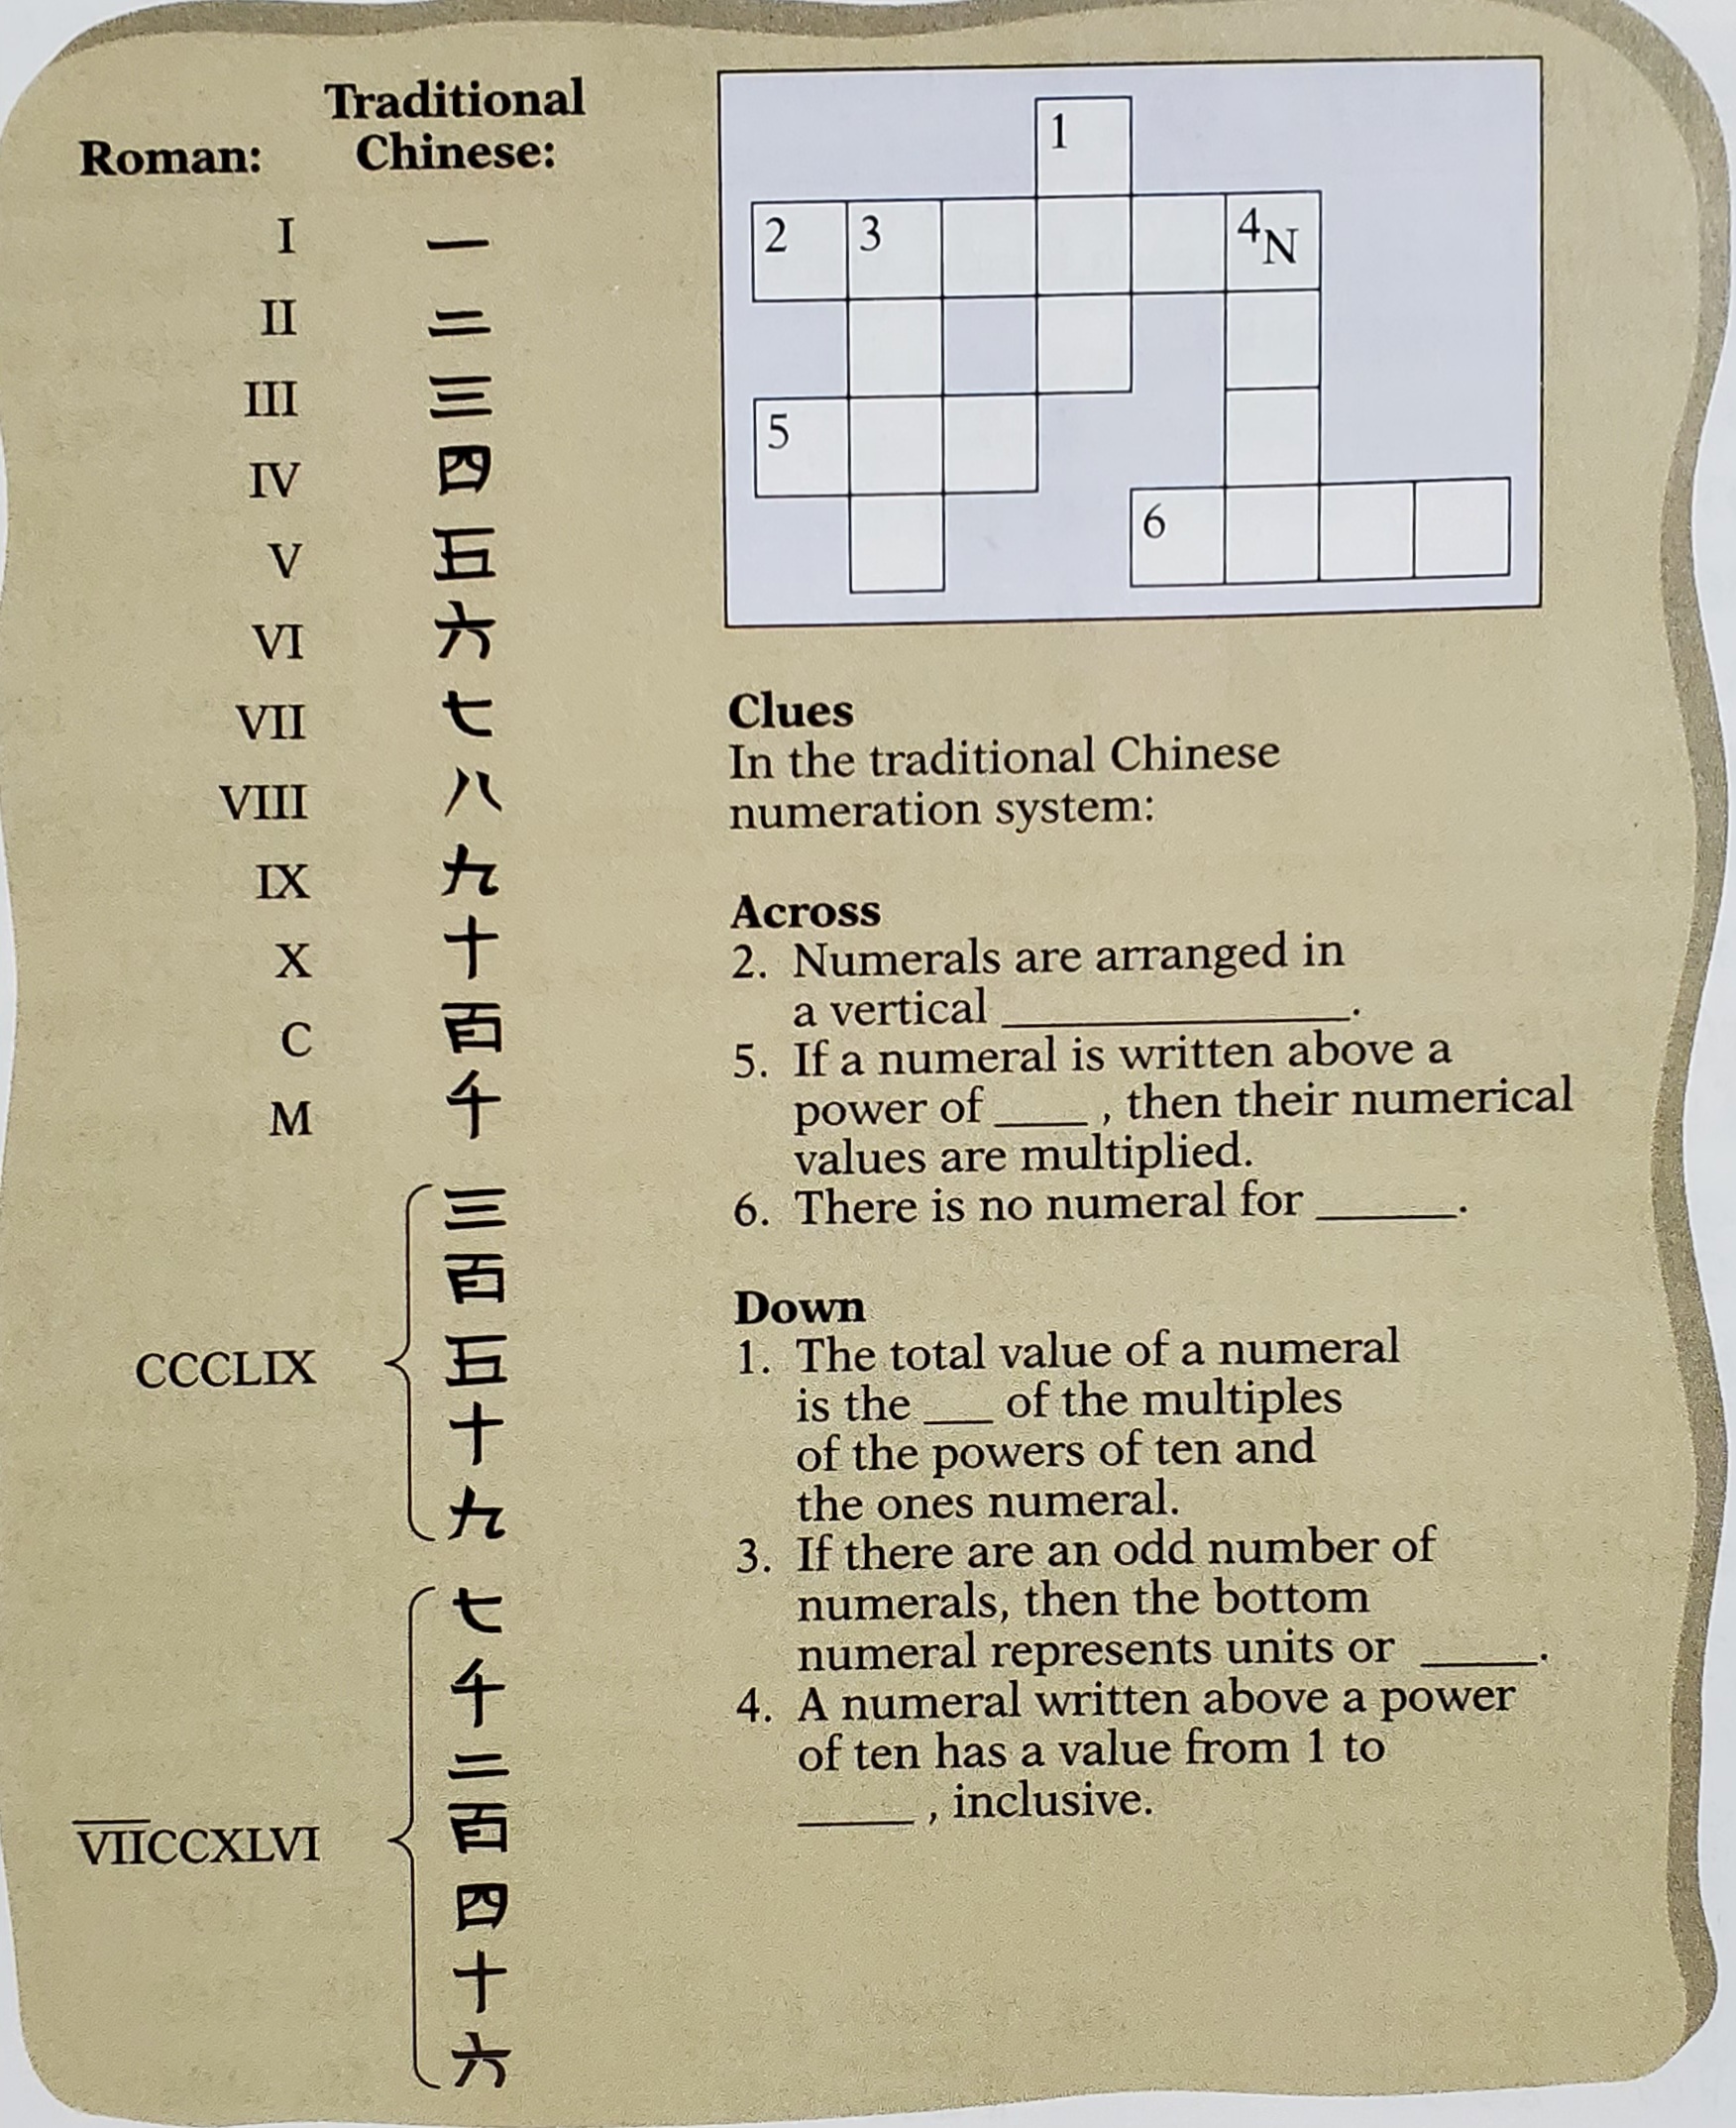 Traditional
Chinese:
Roman:
3
4N
II
III
IV
6.
VI
Clues
In the traditional Chinese
numeration system:
VII
VIII
IX
Across
2. Numerals are arranged in
a vertical
5. If a numeral is written above a
power of
values are multiplied.
6. There is no numeral for
M
, then their numerical
Down
1. The total value of a numeral
is the
of the powers of ten and
the ones numeral.
3. If there are an odd number of
numerals, then the bottom
numeral represents units or
4. A numeral written above a power
of ten has a value from 1 to
CCCLIX
of the multiples
inclusive.
VIICCXLVI
|1川川卡七八九十百千 三百五十九 ヒ+百四十六
